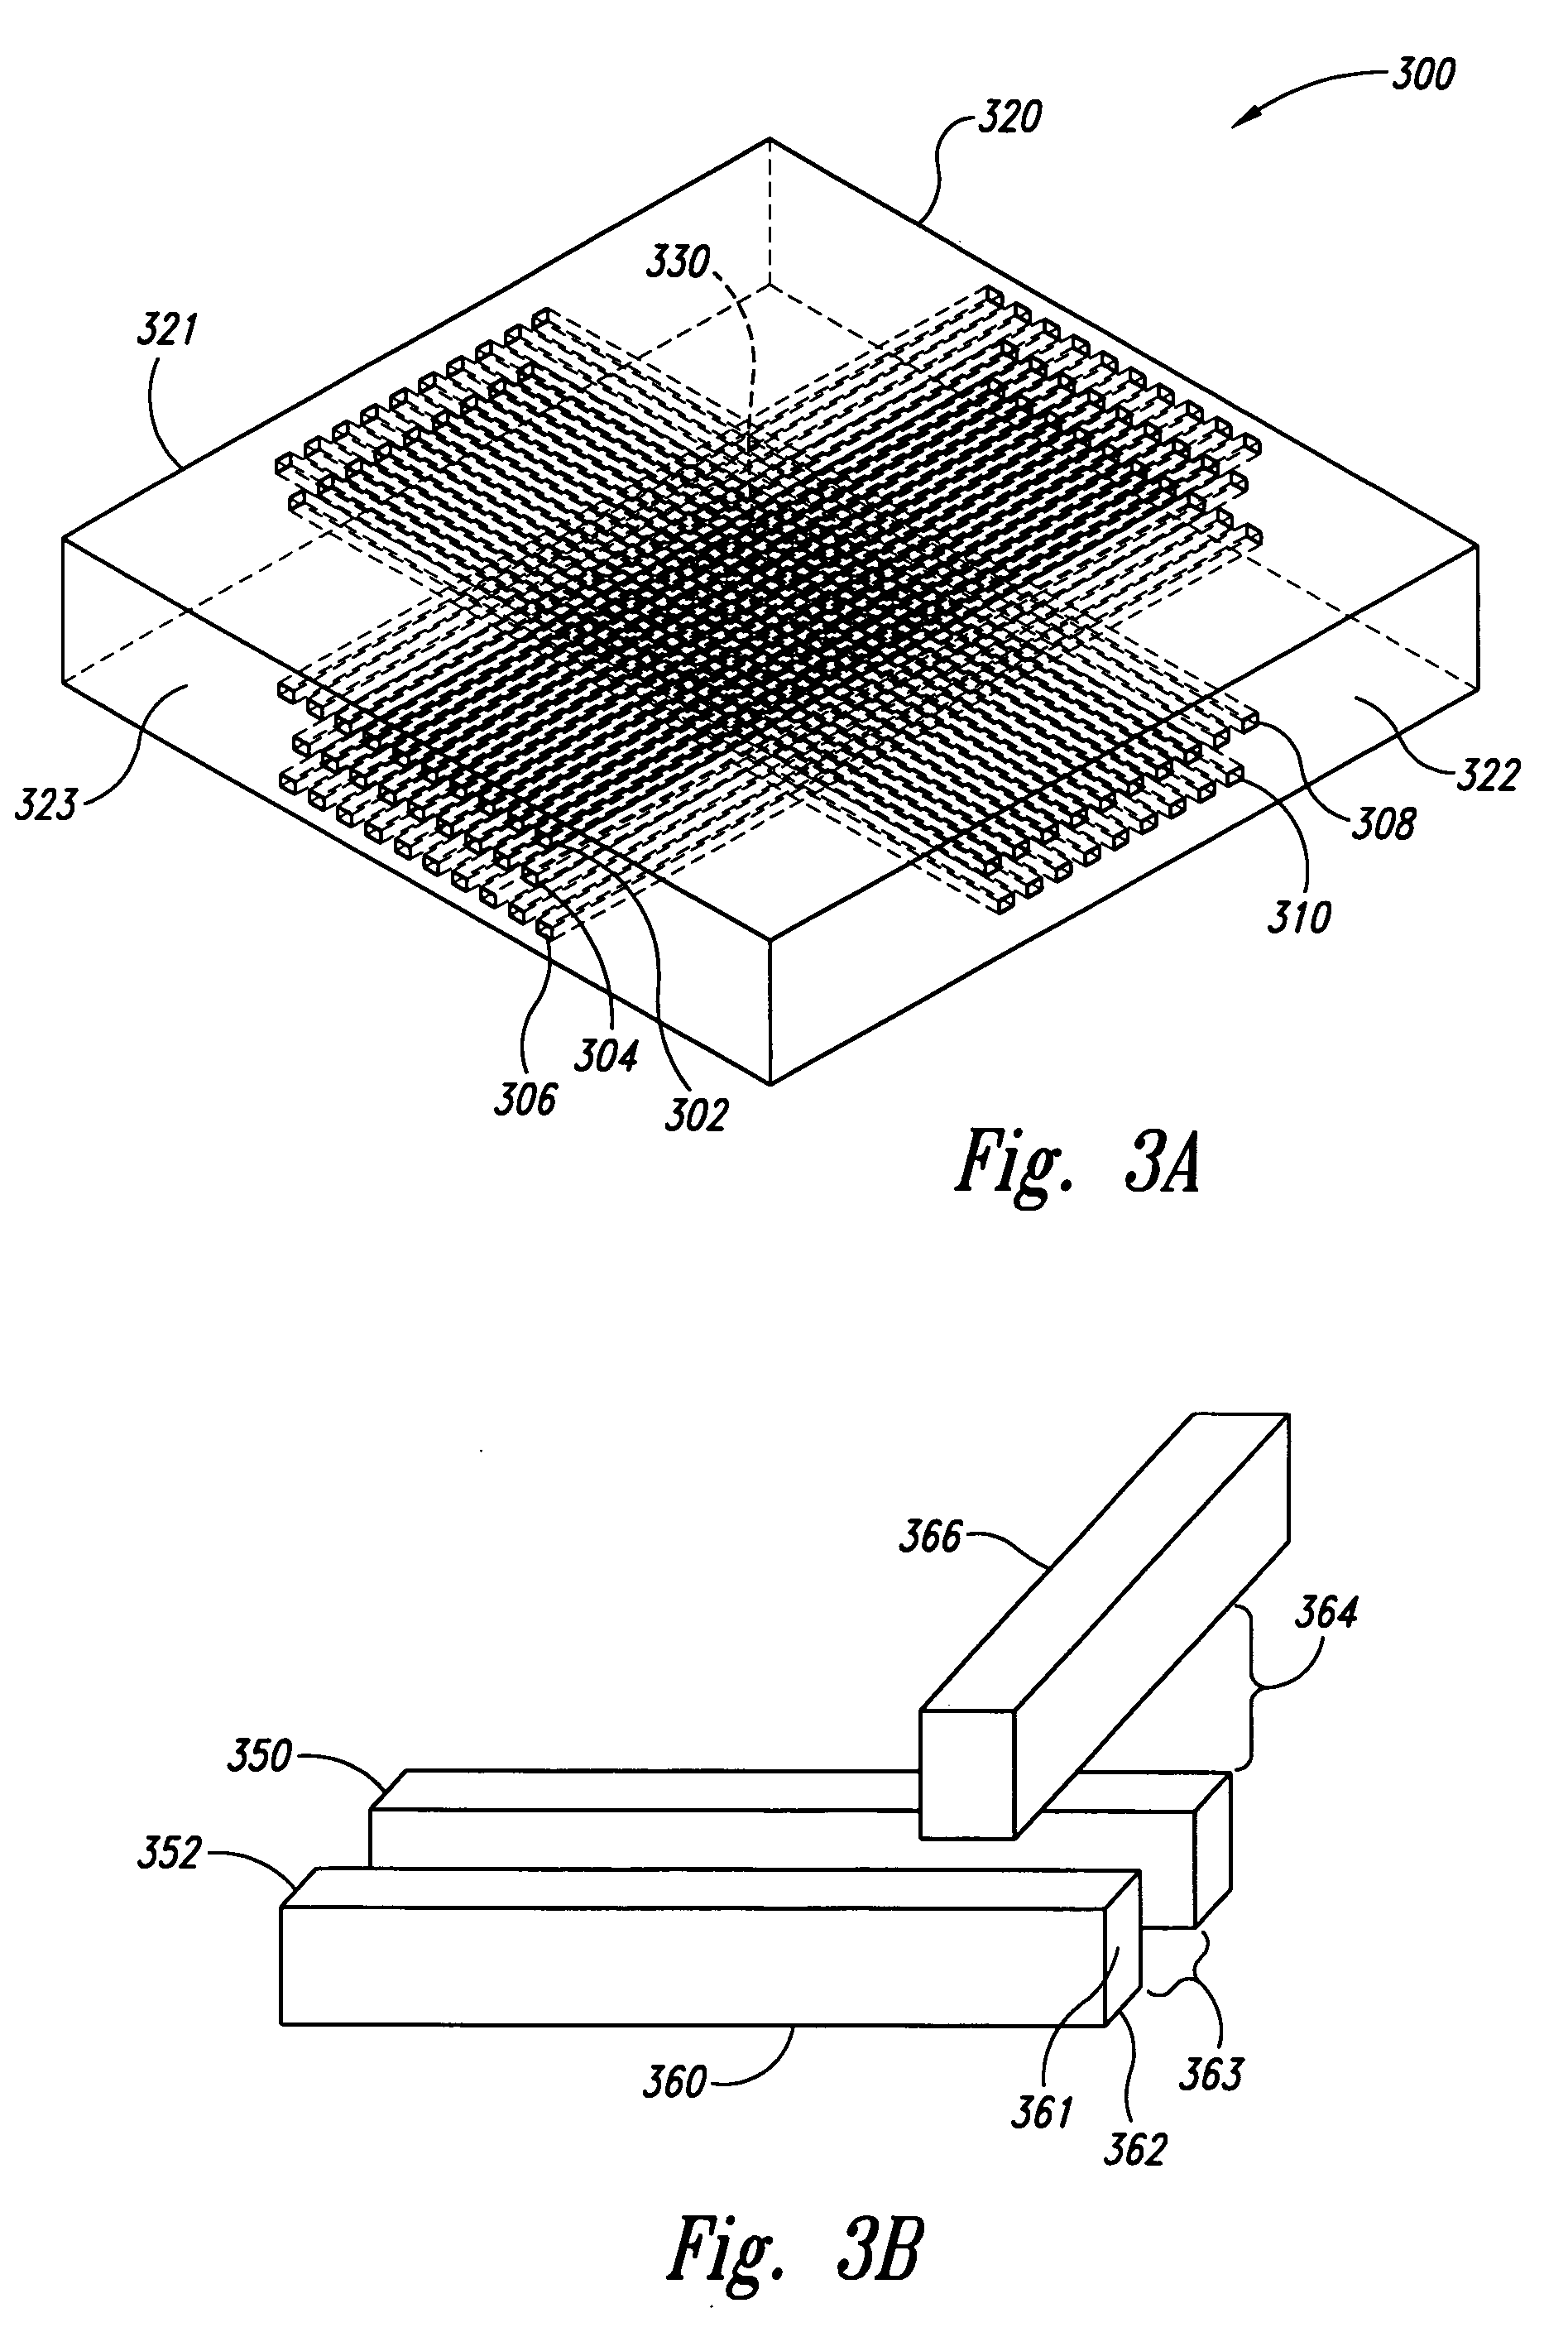 Ultrasonic inspection reference standard for composite materials